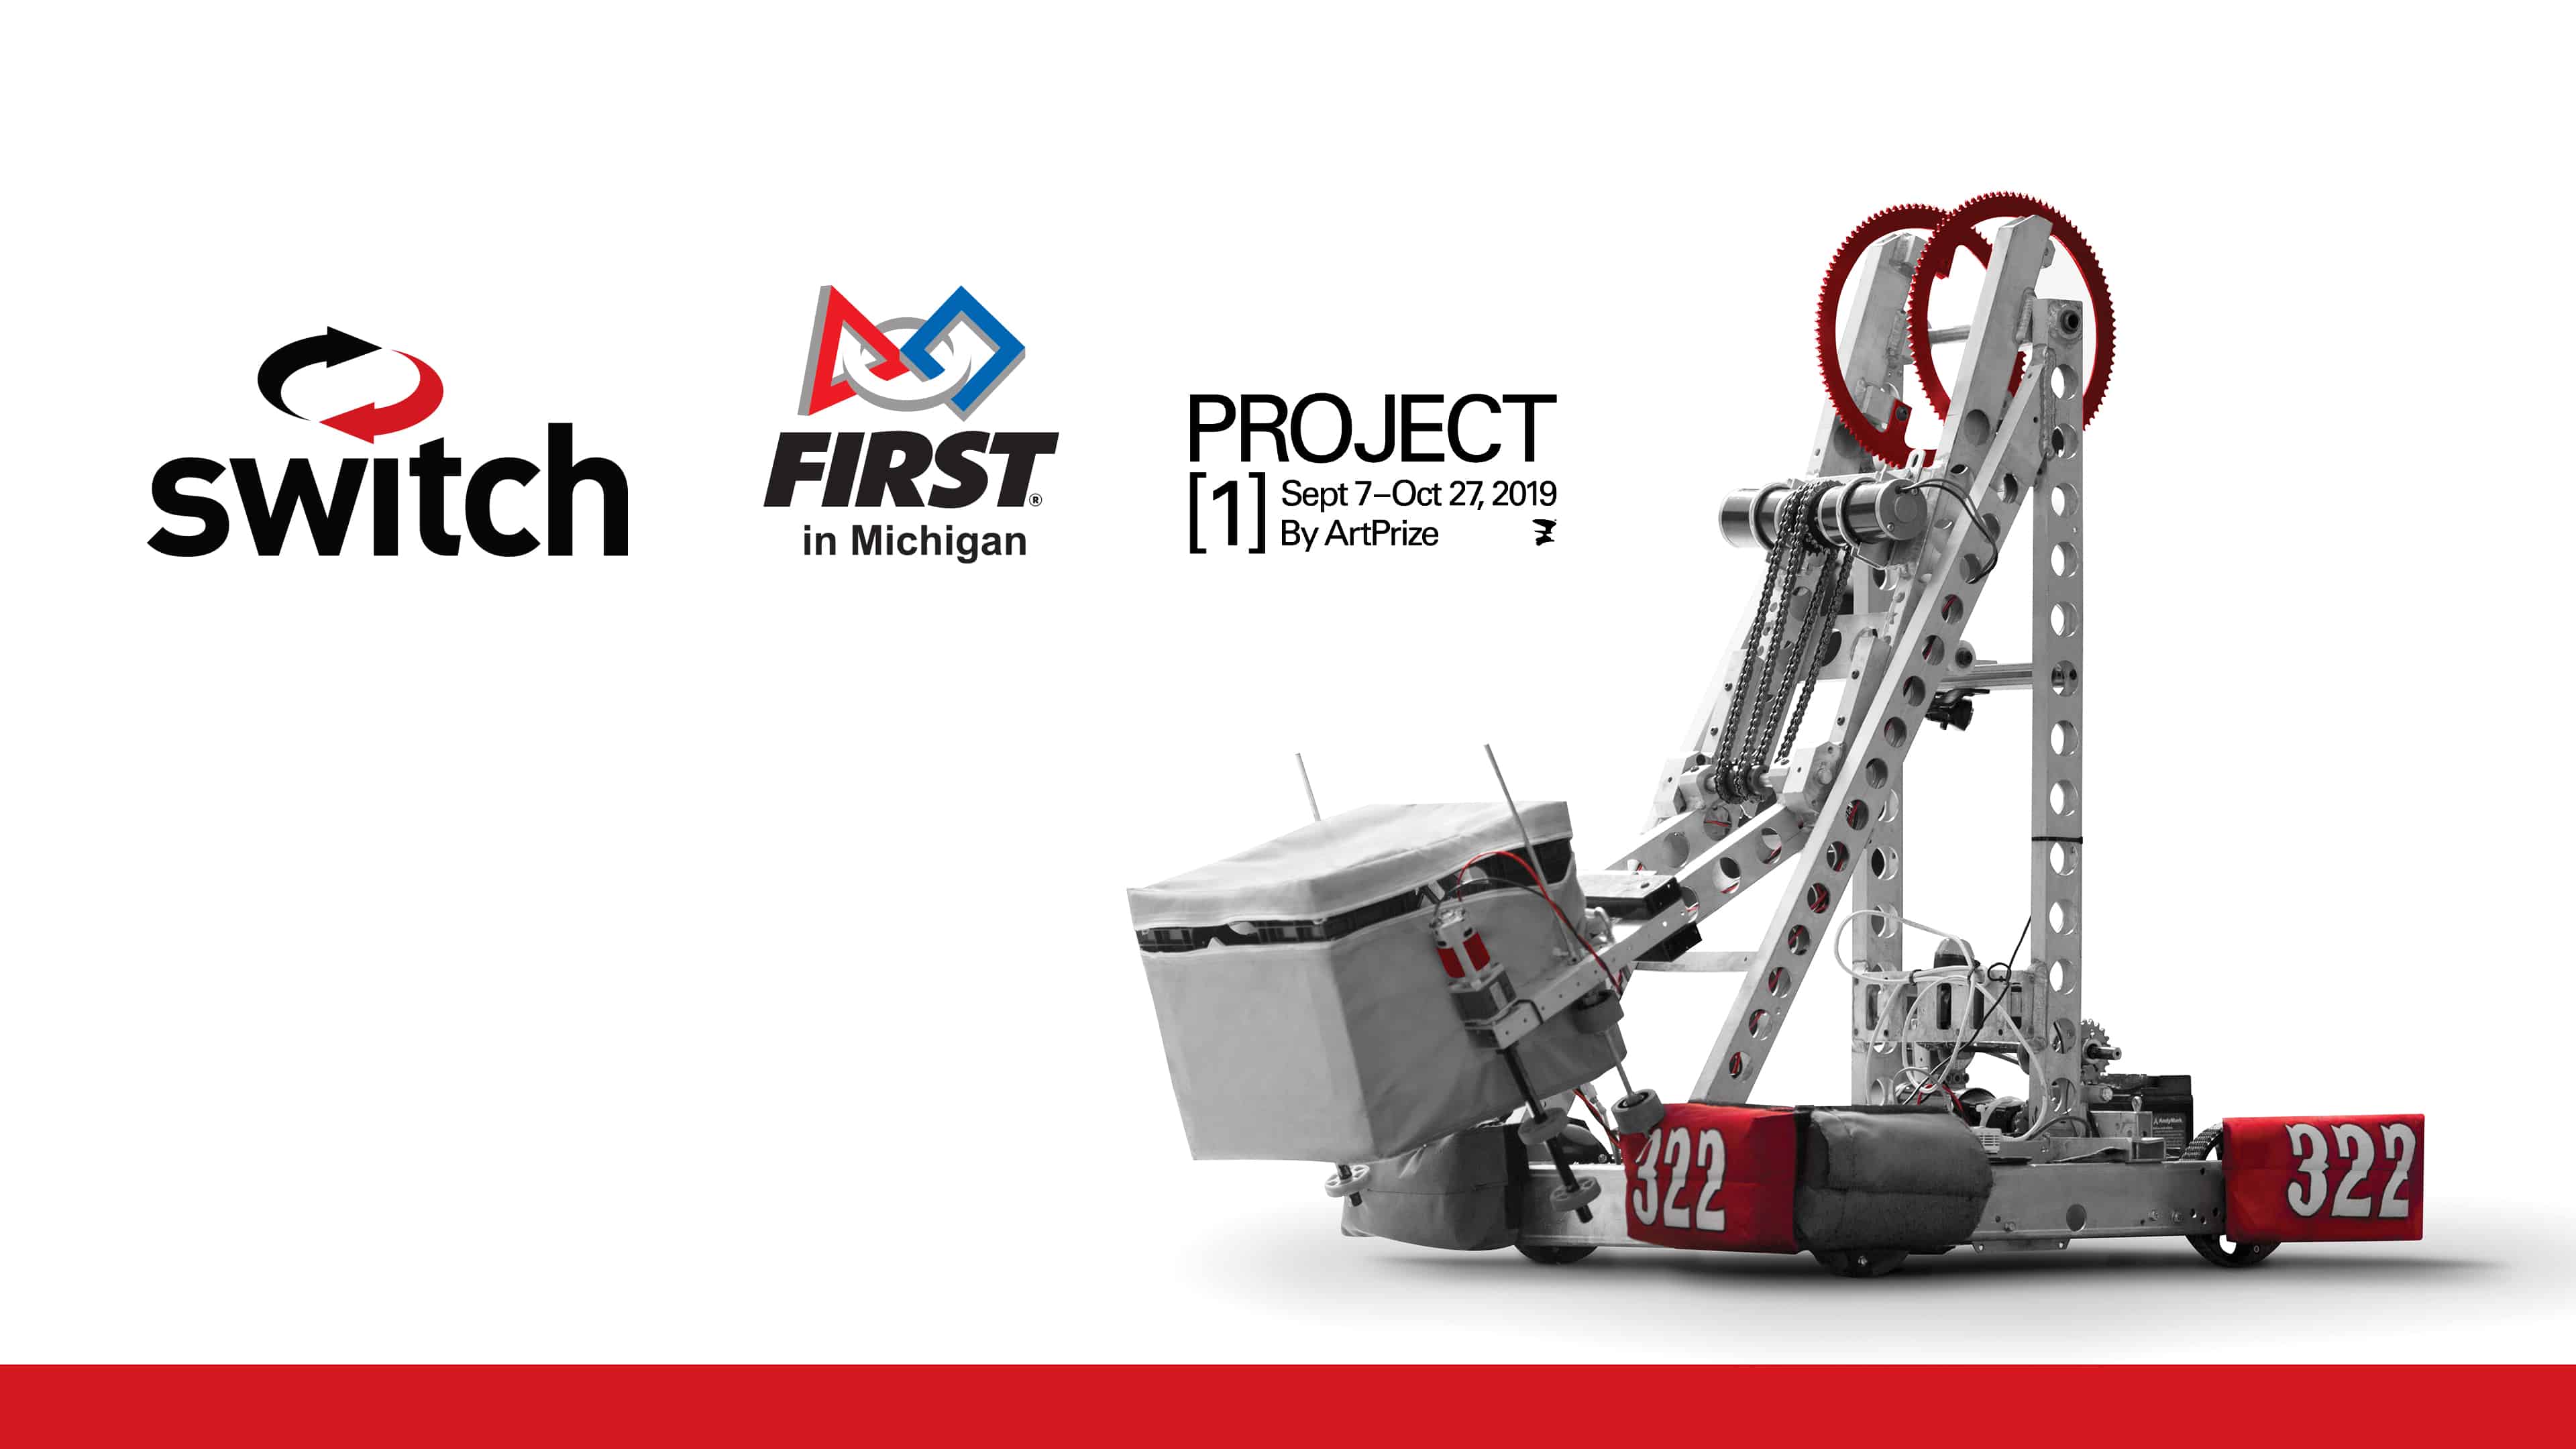 Switch Sponsors FIRST<sup><small>®</small></sup> in Michigan Robotics Teams in STEAM-Based Learning Experiences at Project 1 by ArtPrize